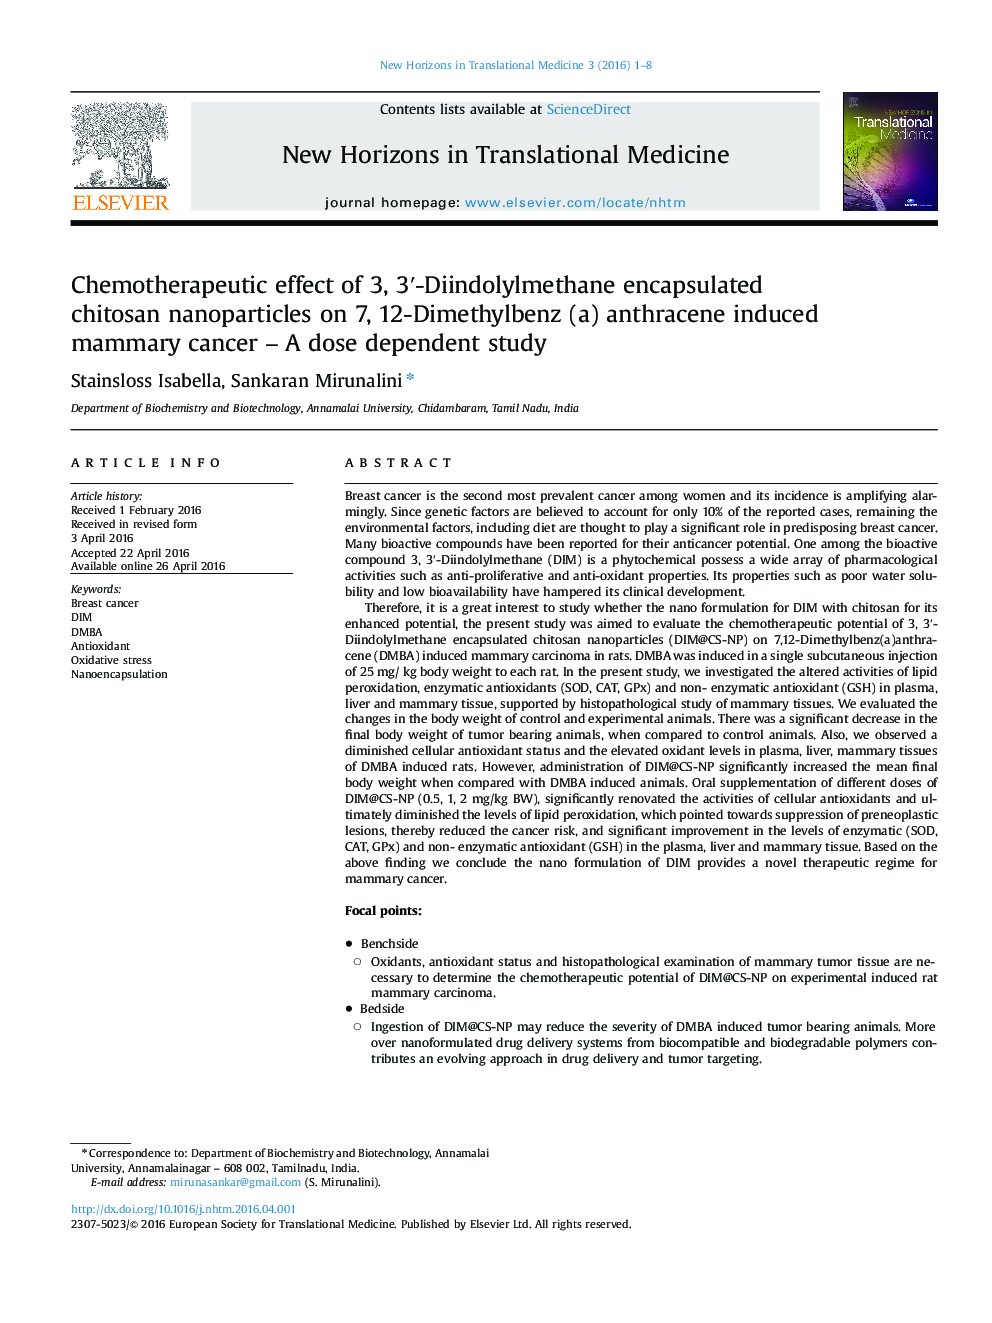 Chemotherapeutic effect of 3, 3â²-Diindolylmethane encapsulated chitosan nanoparticles on 7, 12-Dimethylbenz (a) anthracene induced mammary cancer - A dose dependent study